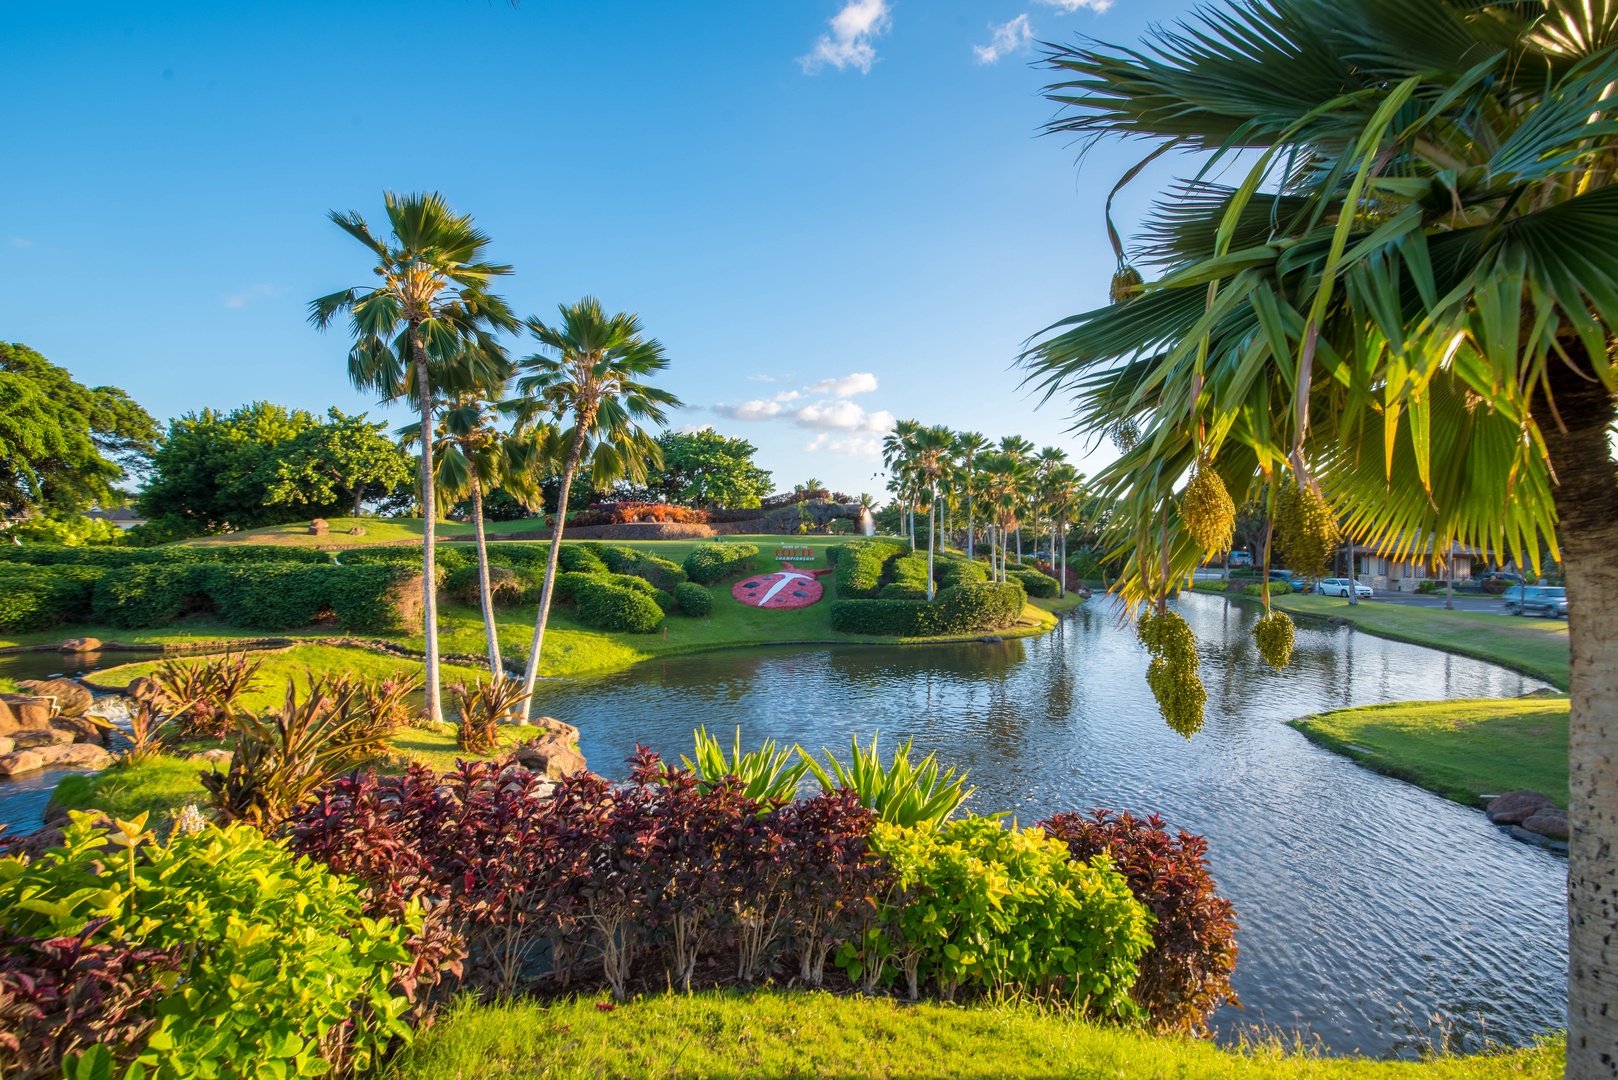 Kapolei Vacation Rentals, Coconut Plantation 1194-3 - Enjoy the golf course and lush green landscaping on the island.